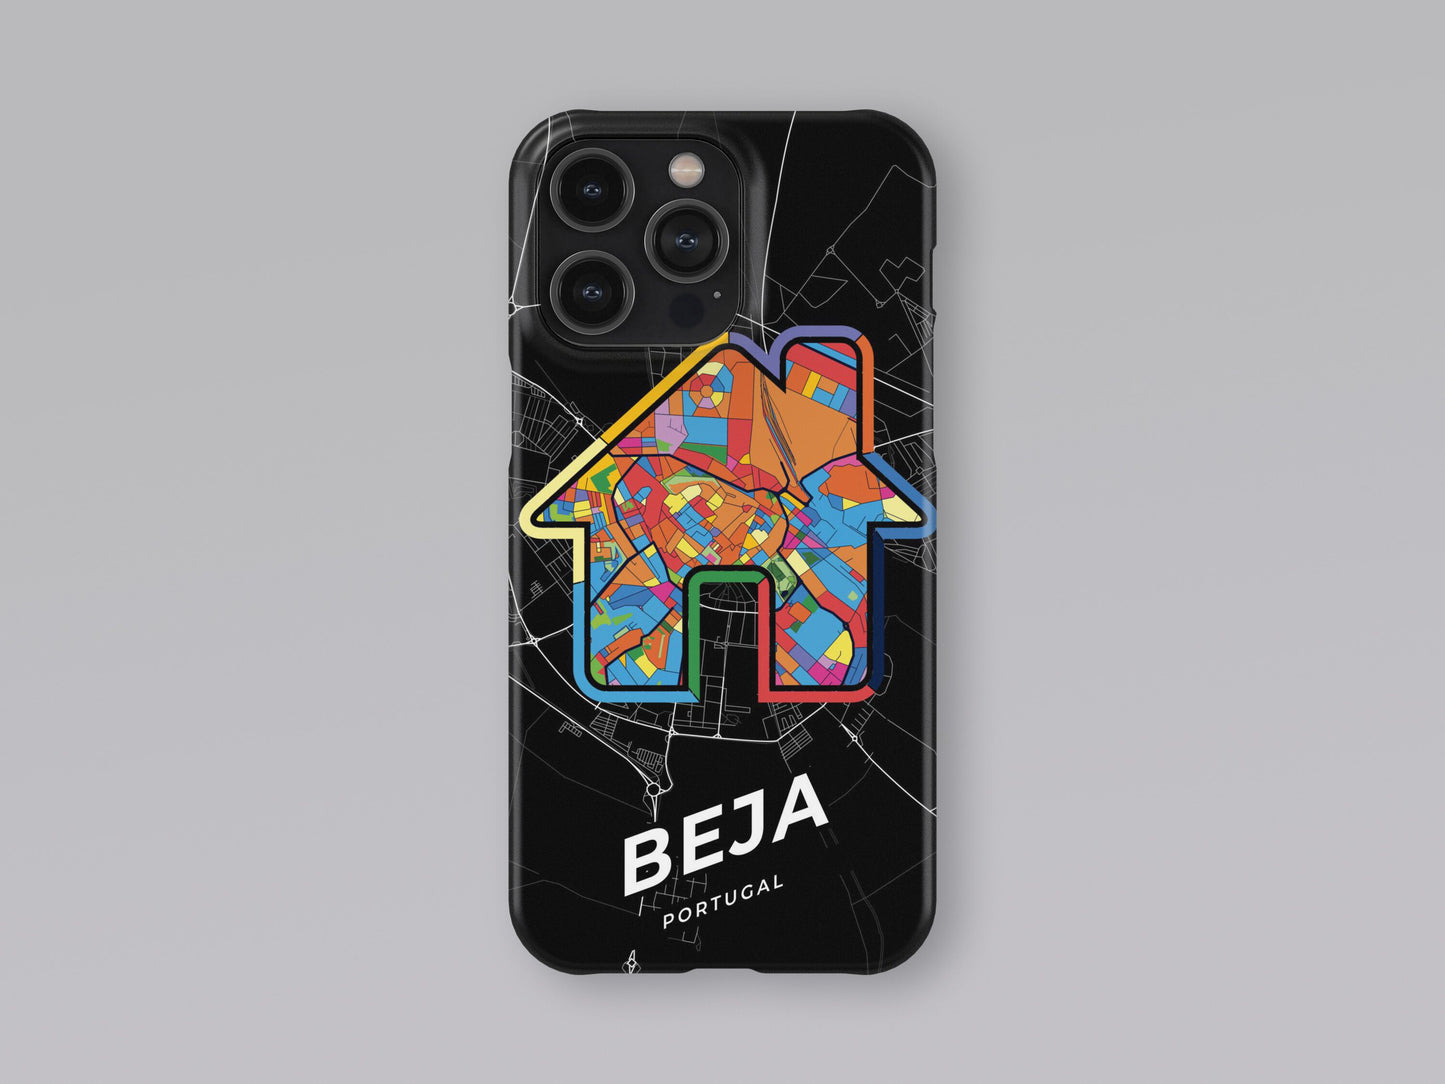 Beja Portugal slim phone case with colorful icon. Birthday, wedding or housewarming gift. Couple match cases. 3